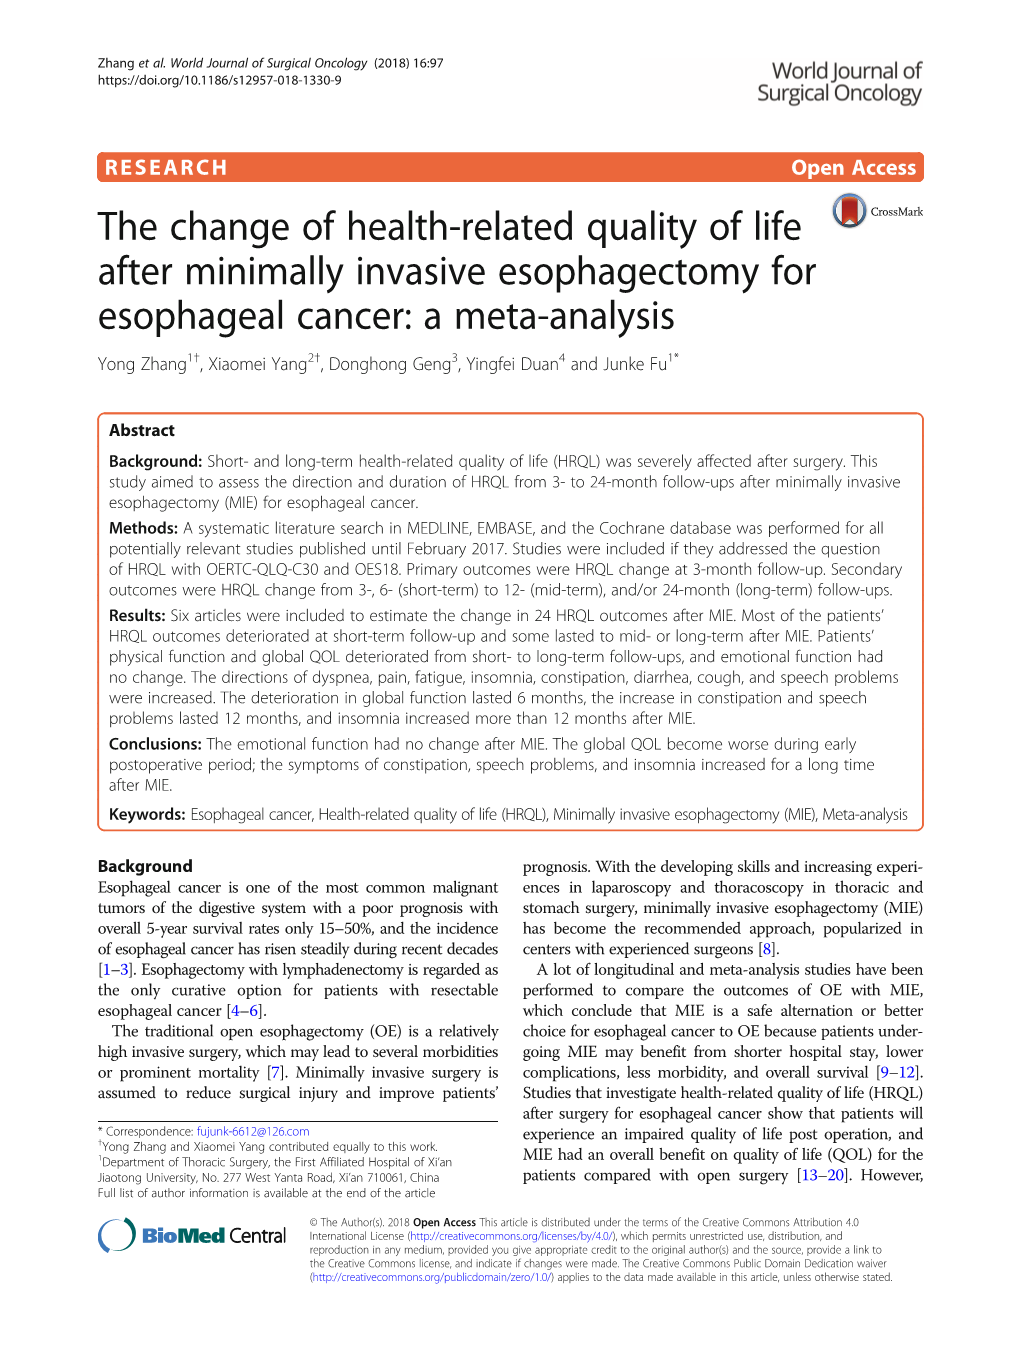 The Change of Health-Related Quality of Life After Minimally Invasive